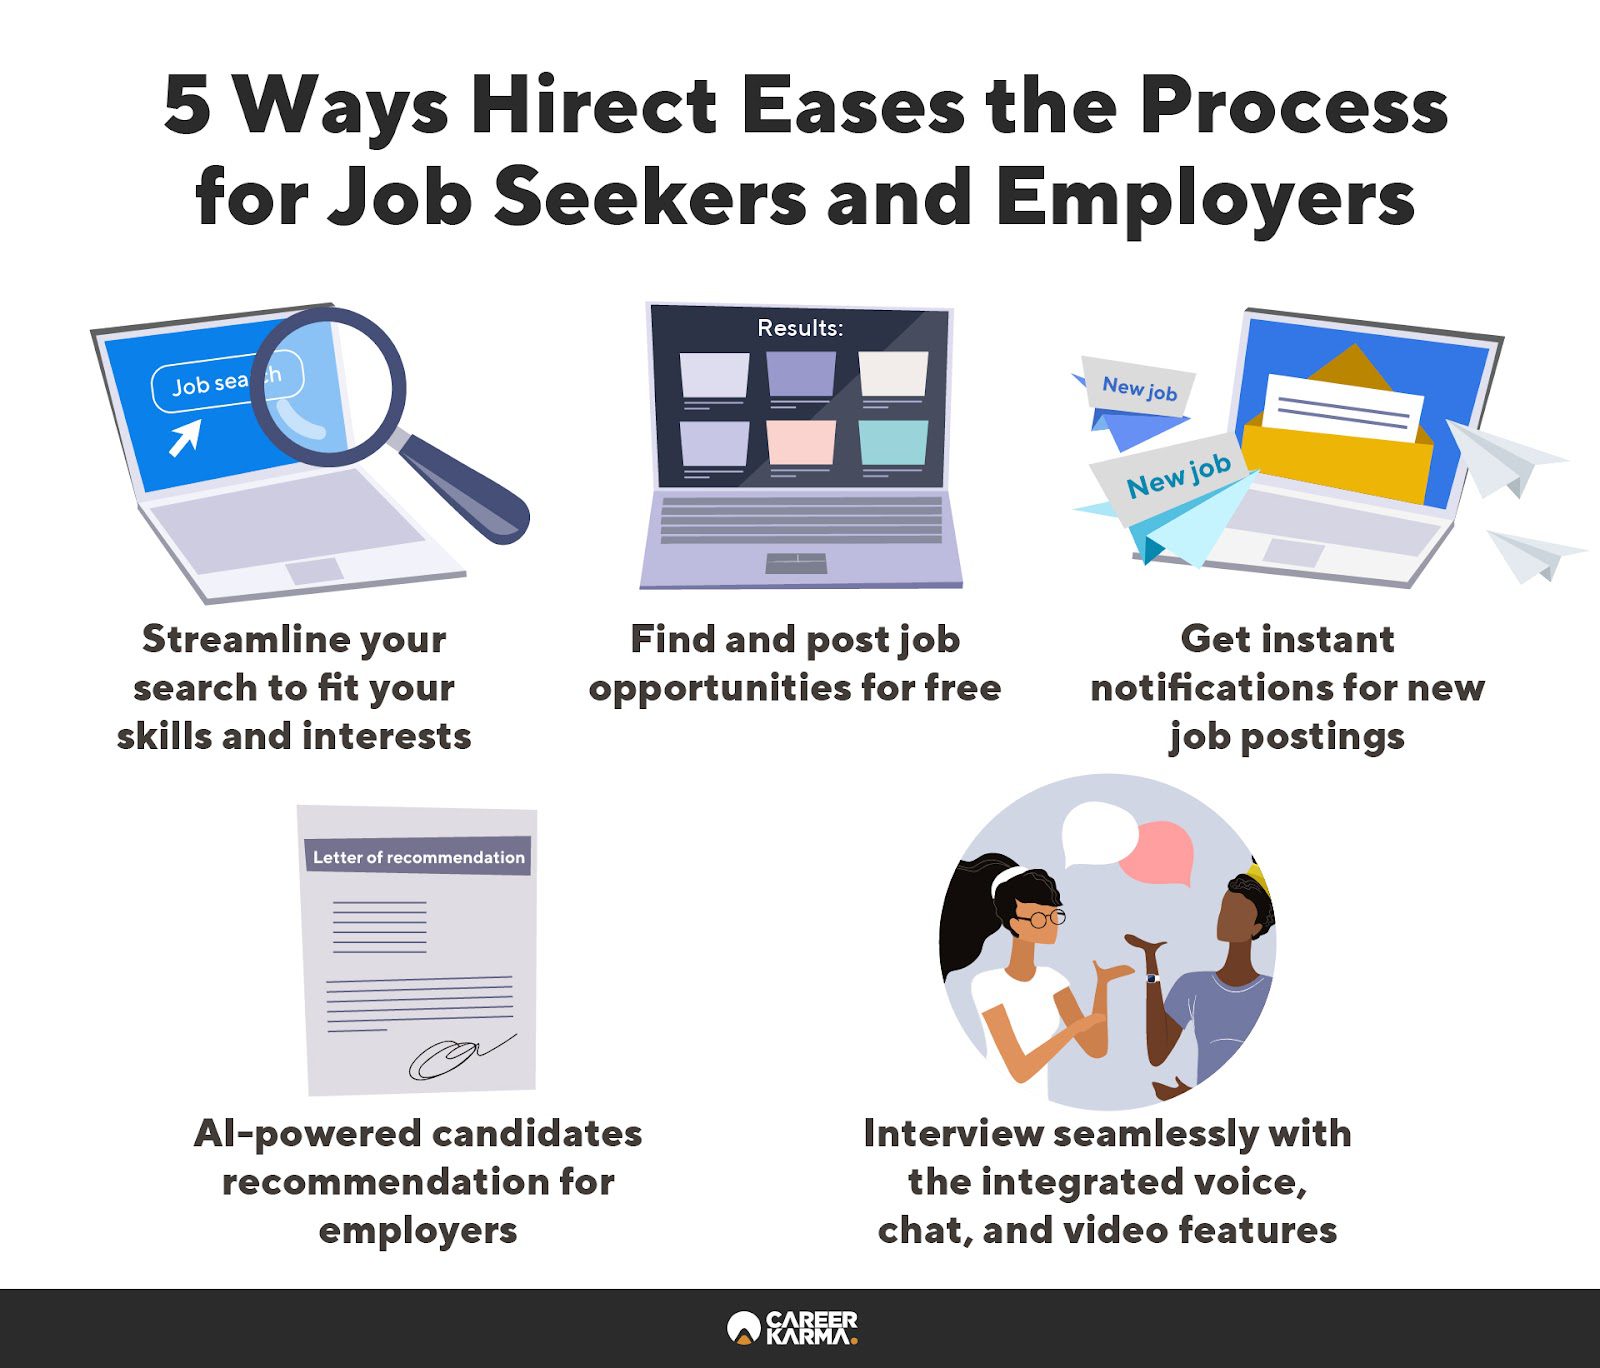 An infographic highlighting the key benefits of joining Hirect